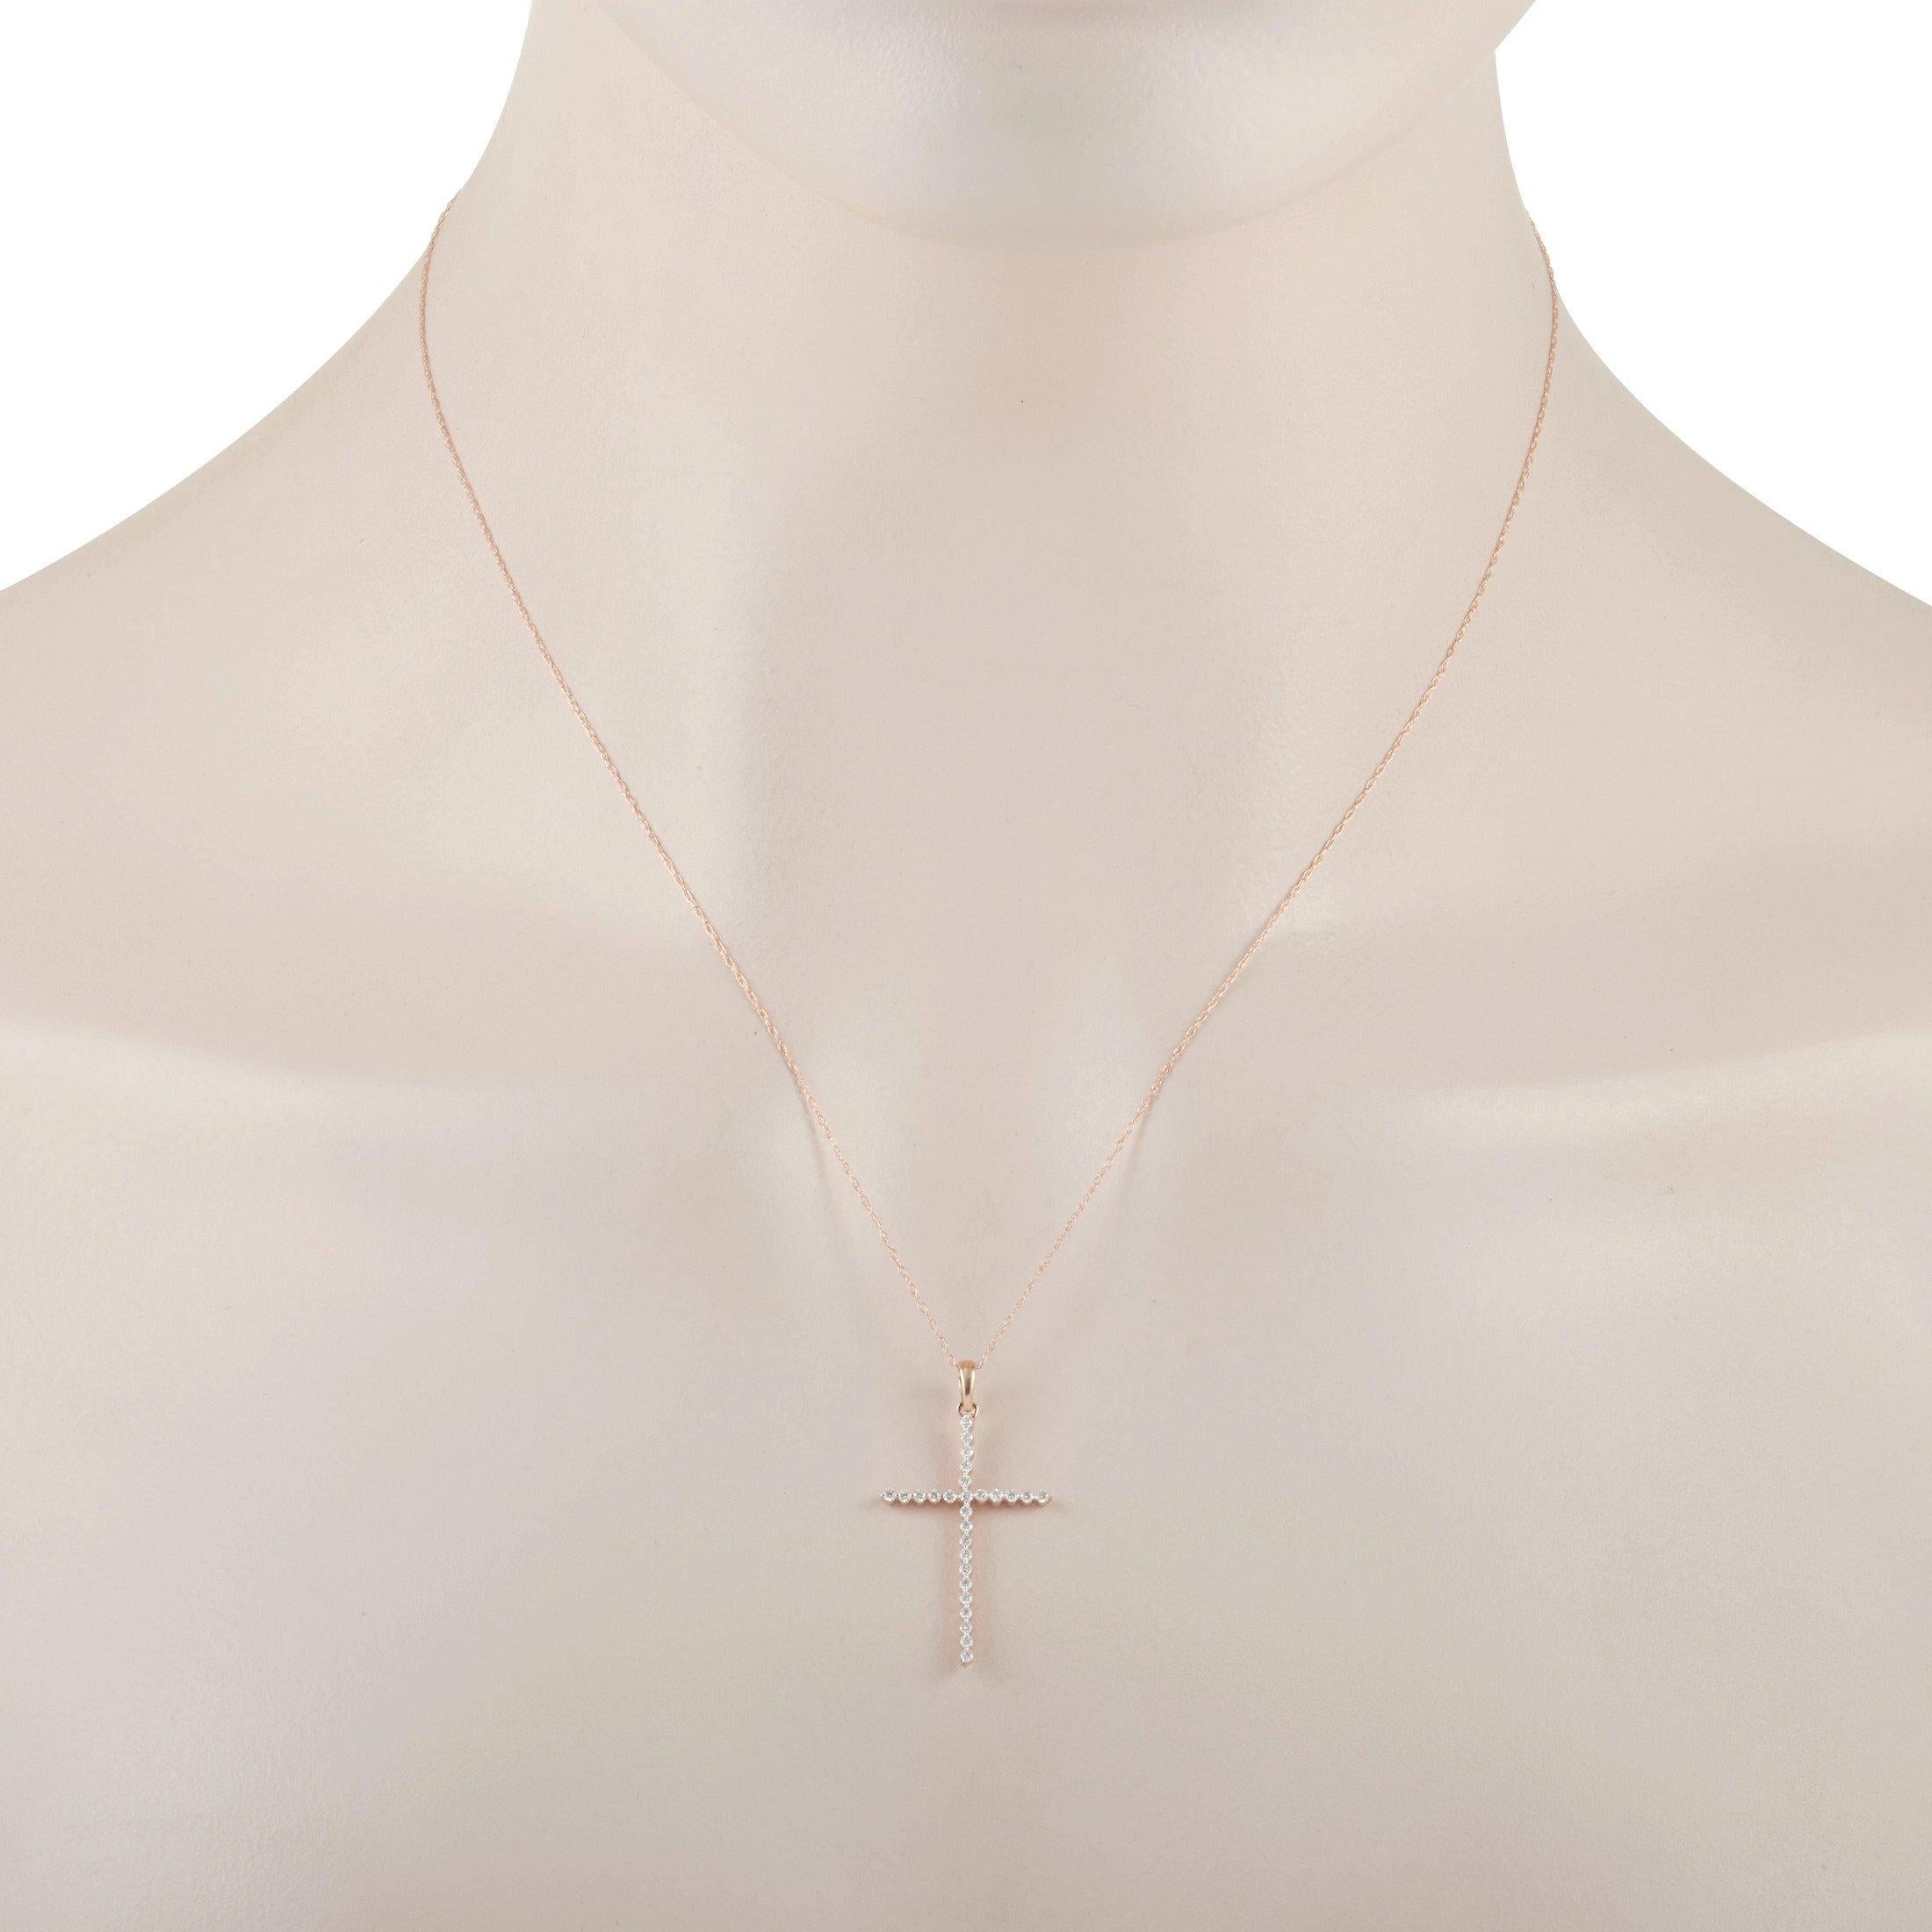 This pendant necklace possesses an inherent opulence. The beauty of this piece begins with the delicate 17” long 14K Rose Gold chain, which secures via spring ring closure. Suspended from the chain, you’ll find an elegant cross shaped pendant